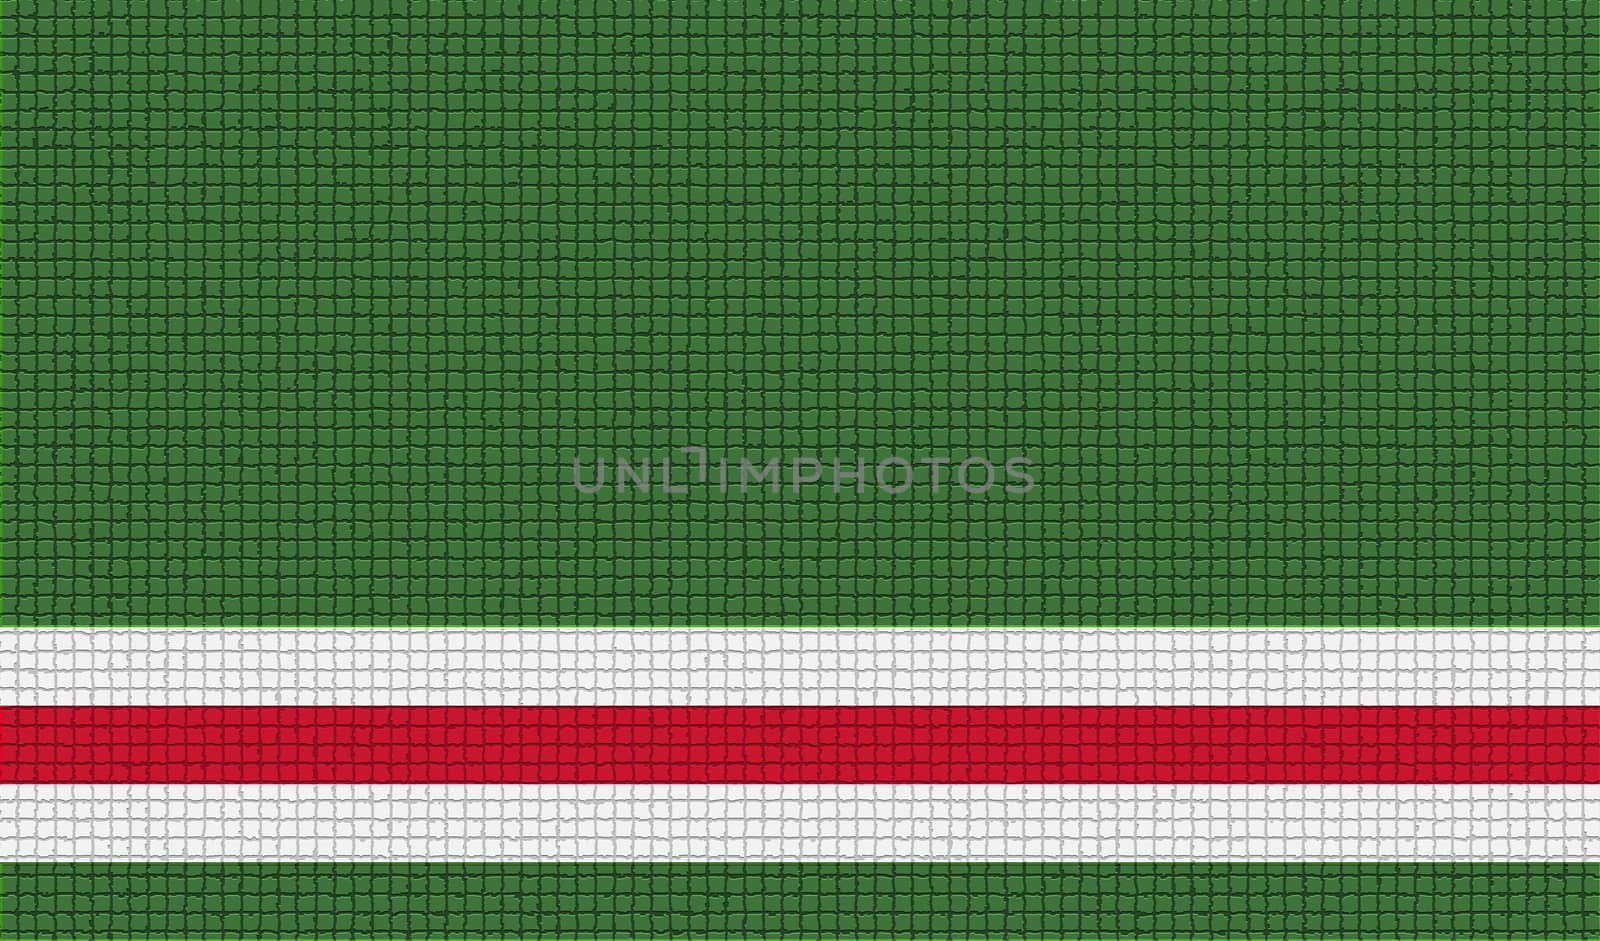 Flags of Chechen Republic of Ichkeria with abstract textures. Rasterized version